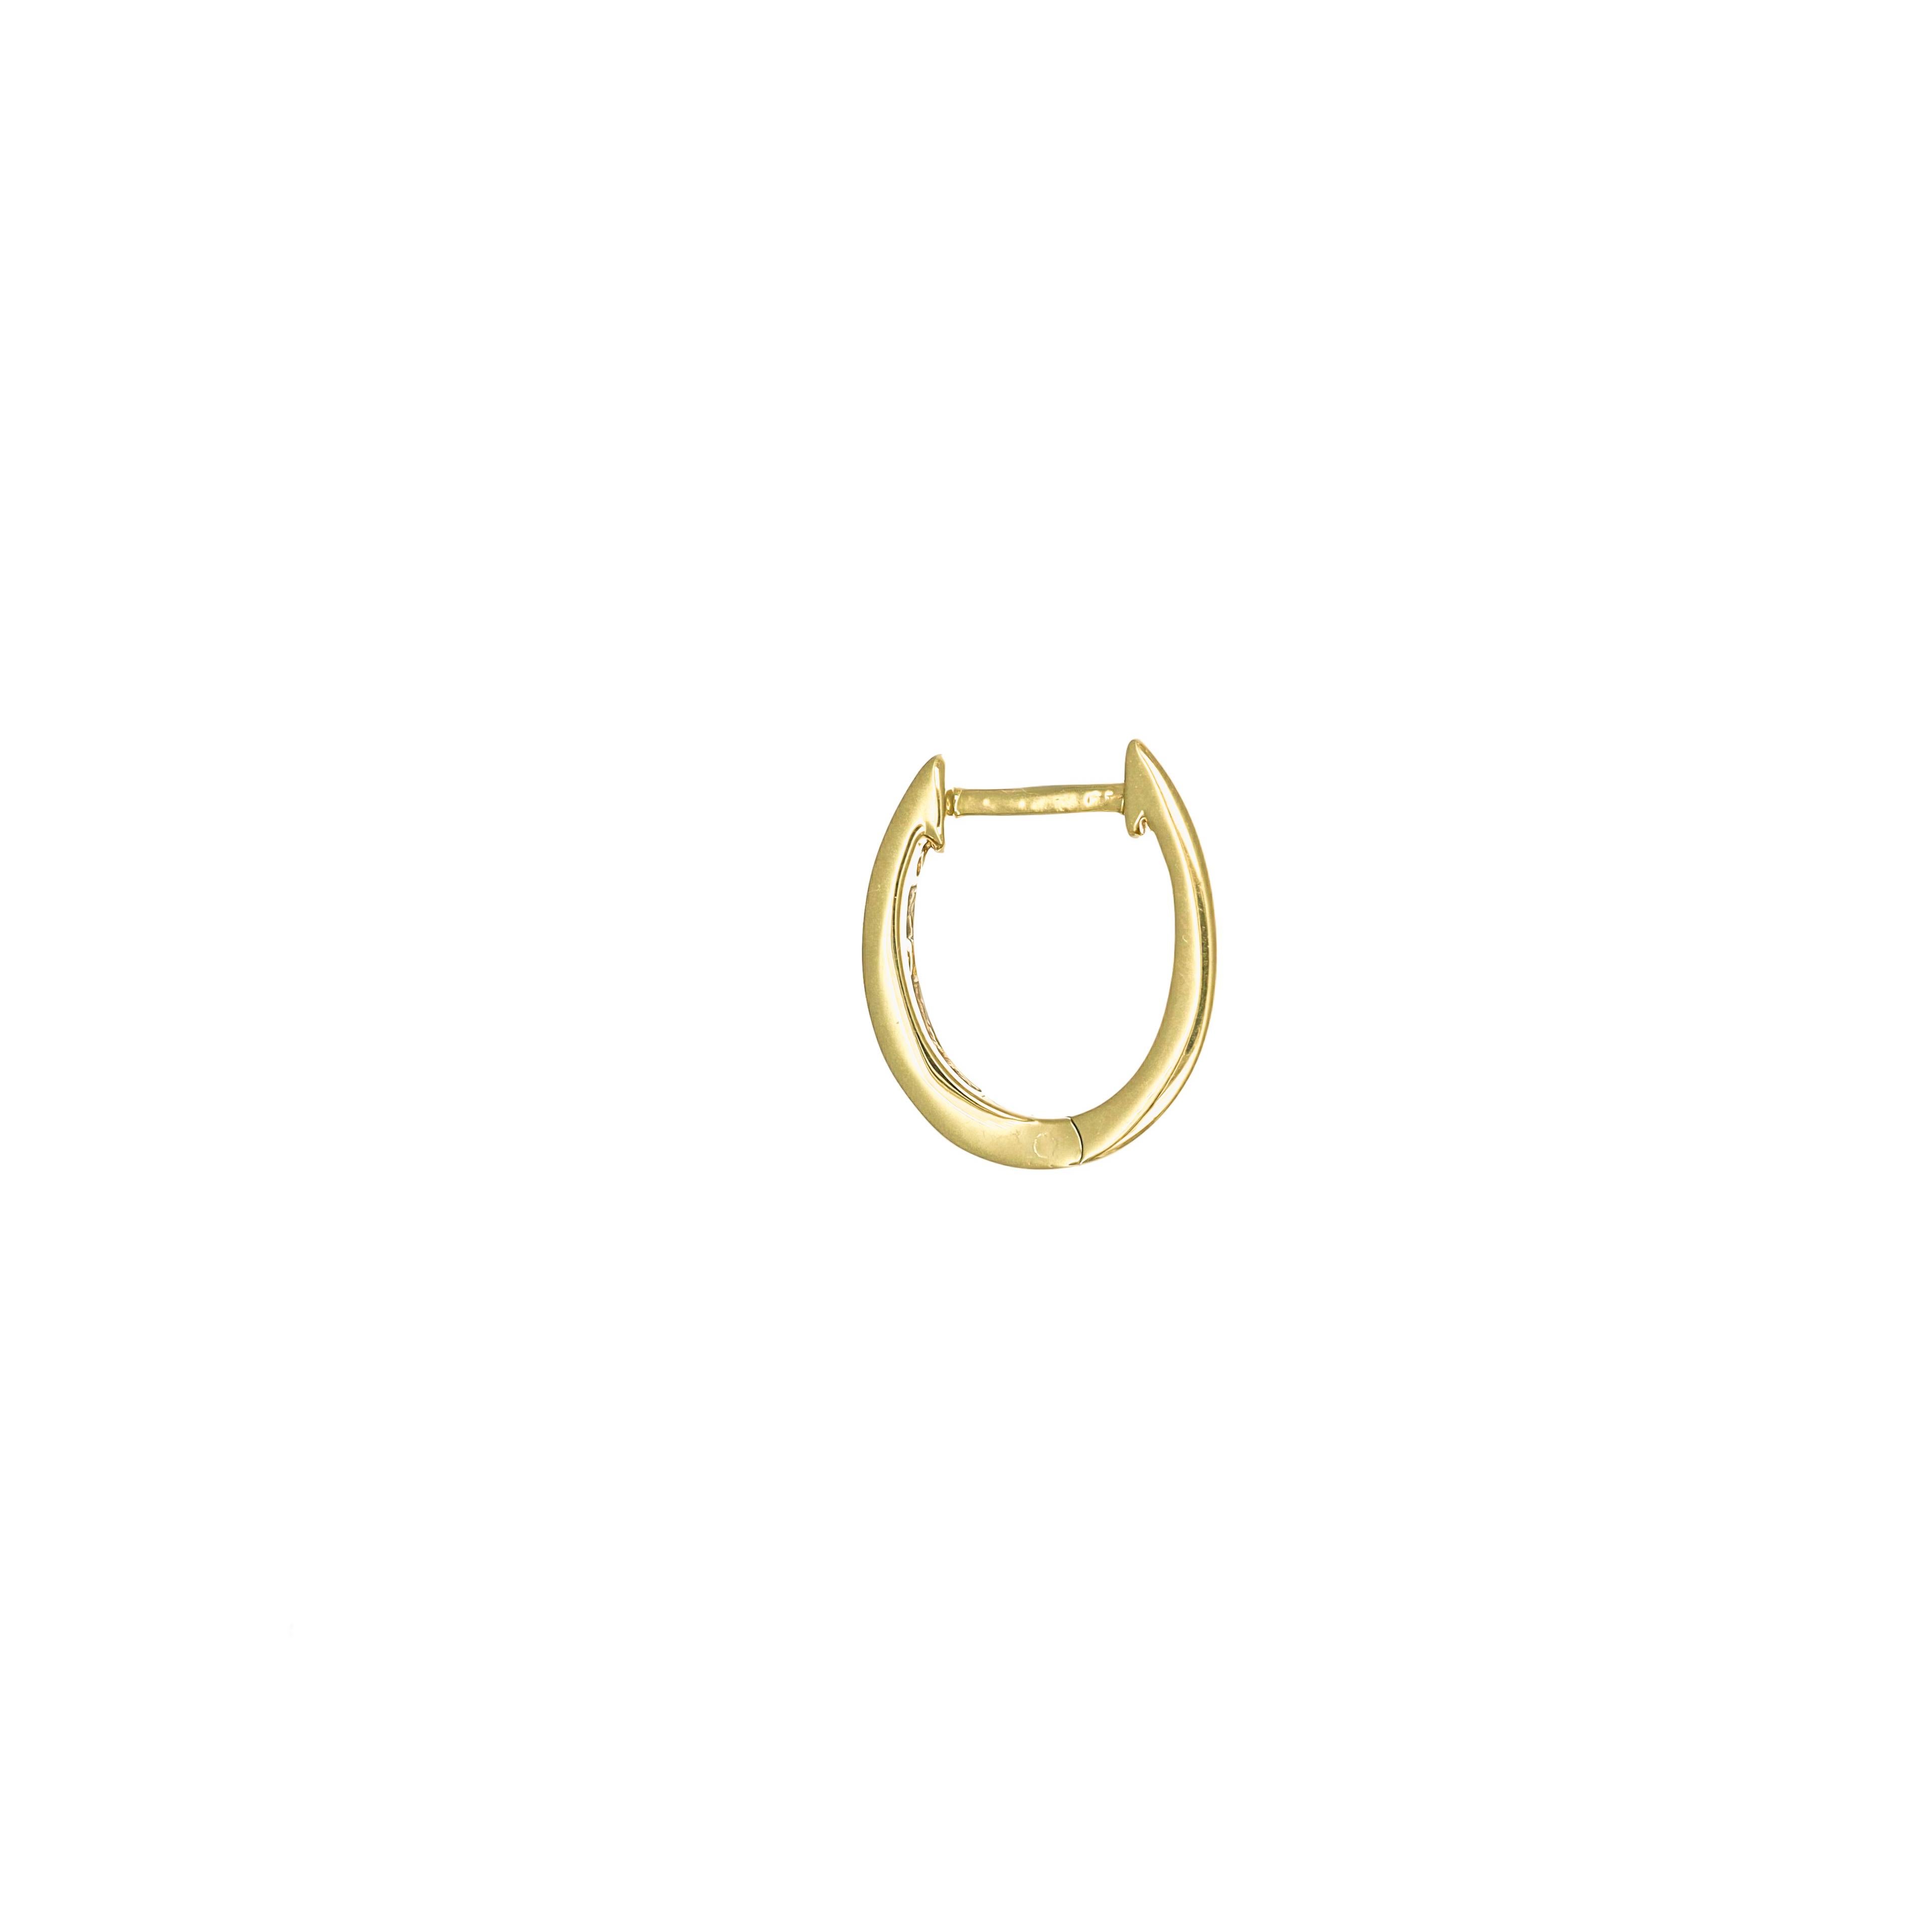 Introducing the epitome of minimalistic beauty, our 18KT Gold Round Diamond Half Hoop Huggies with Bezel detailing are a radiant expression of refined elegance. 

Crafted with meticulous attention to detail, these huggie earrings redefine the notion